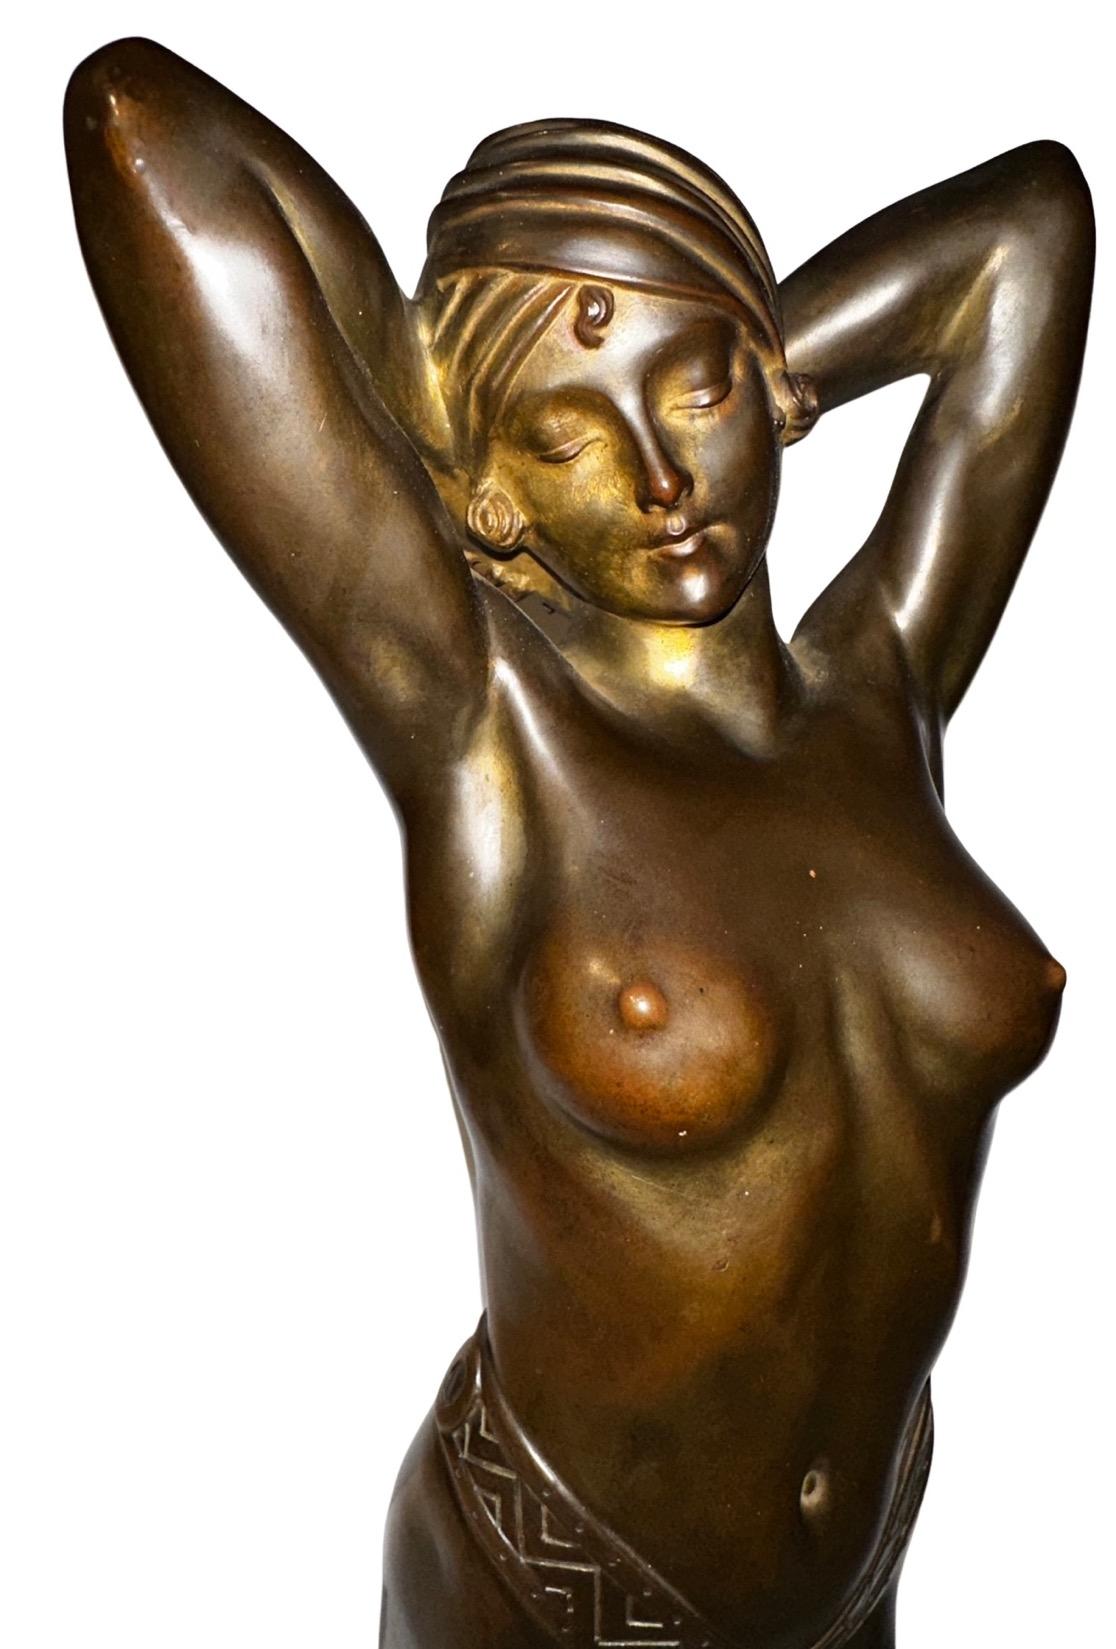 The Art Deco bronze statue portrays a striking sensuous female figure bending with poise and confidence while at the same time, her arms are bent behind her head. Her body exudes the sleek sexy and streamlined aesthetic of the Art Deco era,